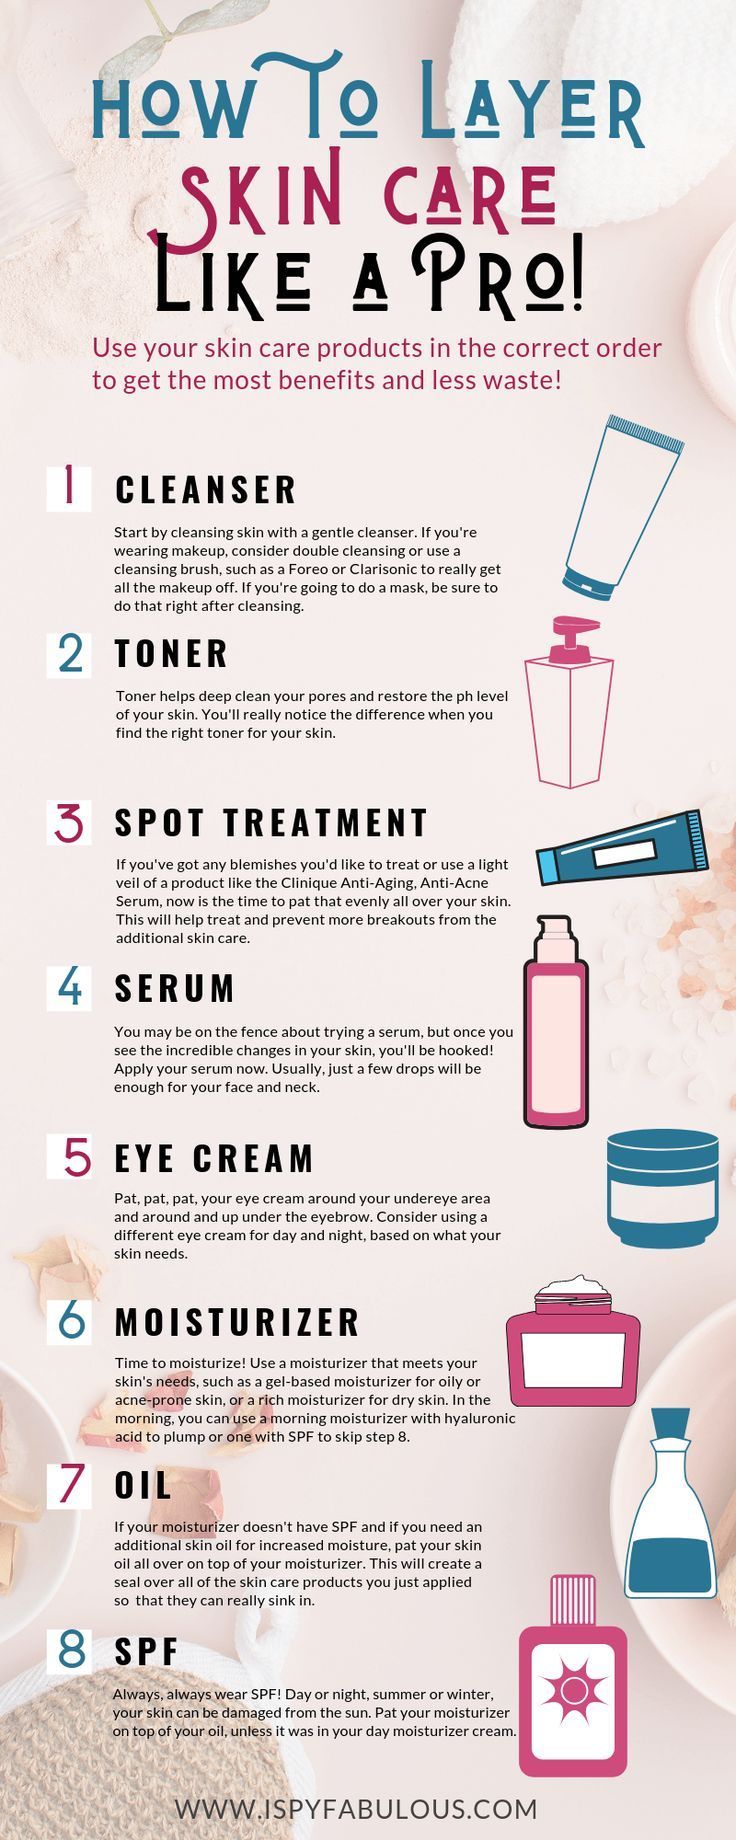 How To Layer Your Skincare Like a Pro! - I Spy Fabulous - How To Layer Your Skincare Like a Pro! - I Spy Fabulous -   12 beauty care & skincare ideas